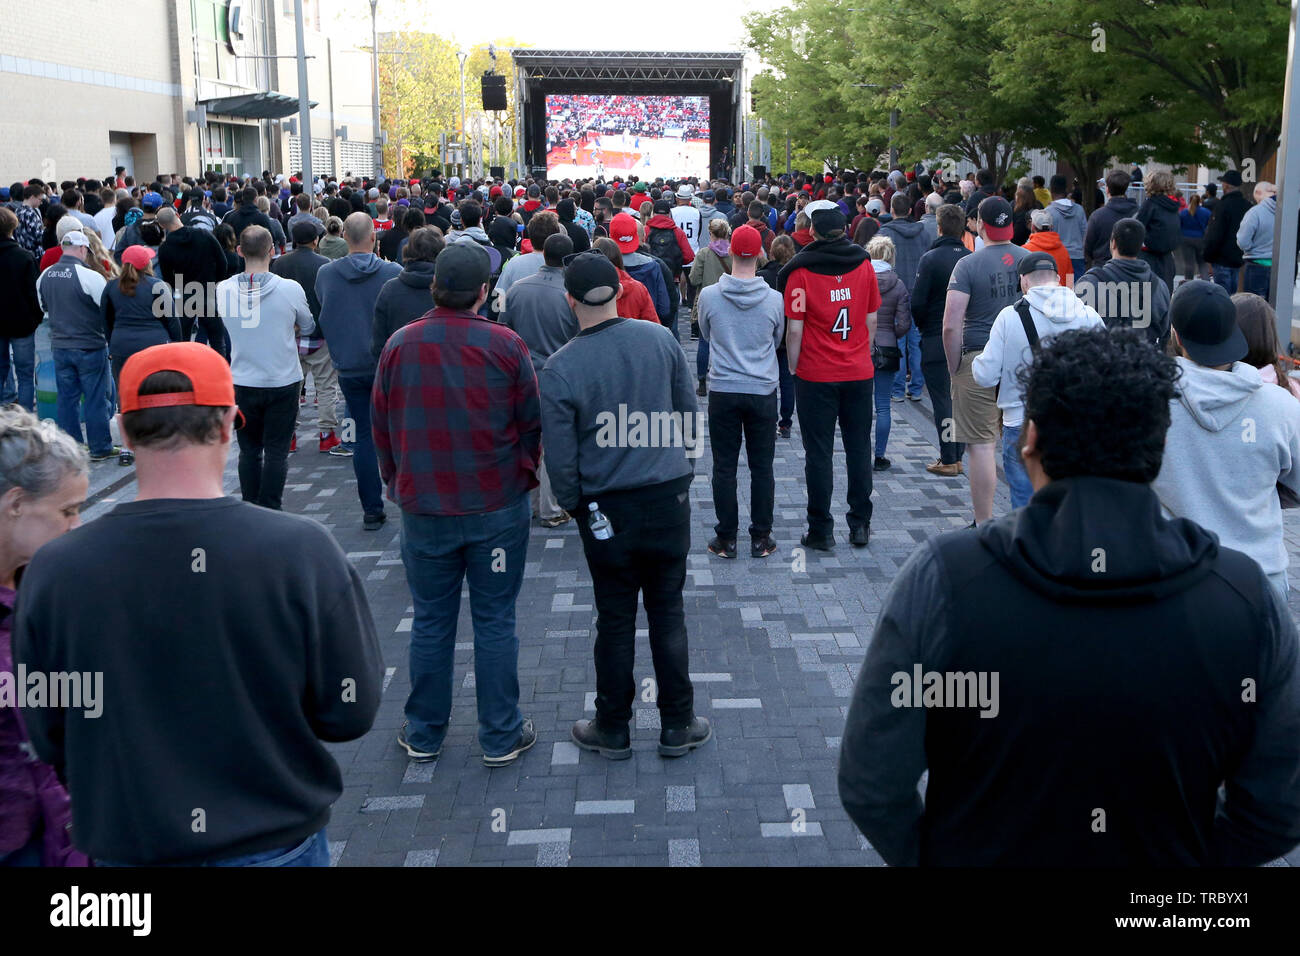 Fans sand head down to Jurassic Park in Downtown London Ontario to Cheer on the Toronto Raptors for Game 2 of the NBA Finals. Stock Photo